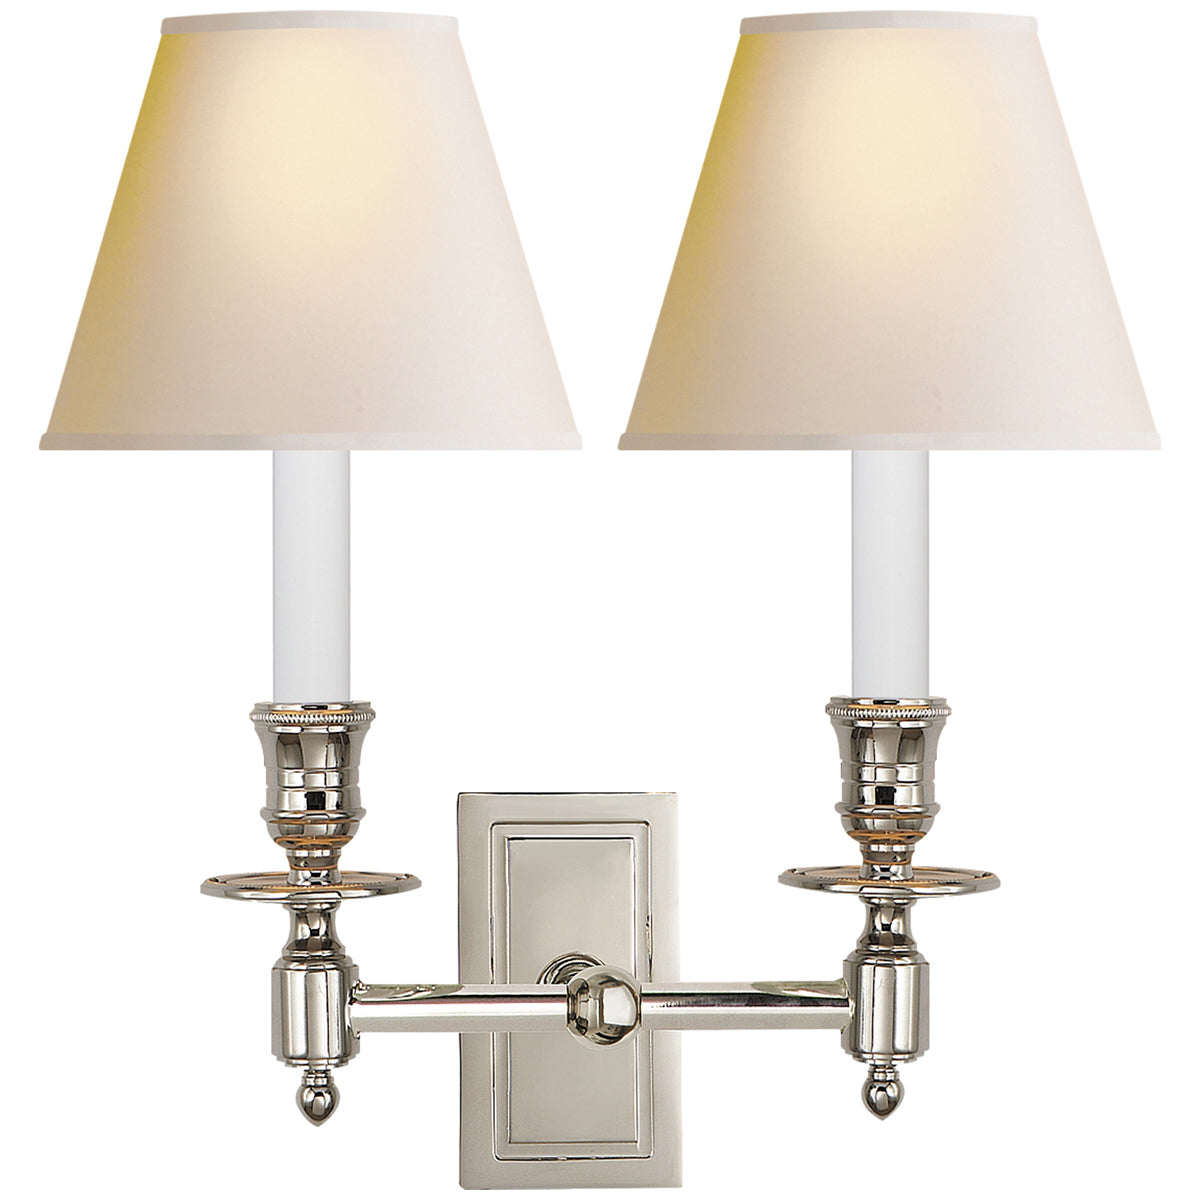 Visual Comfort French Double Library Sconce with Natural Paper Shade